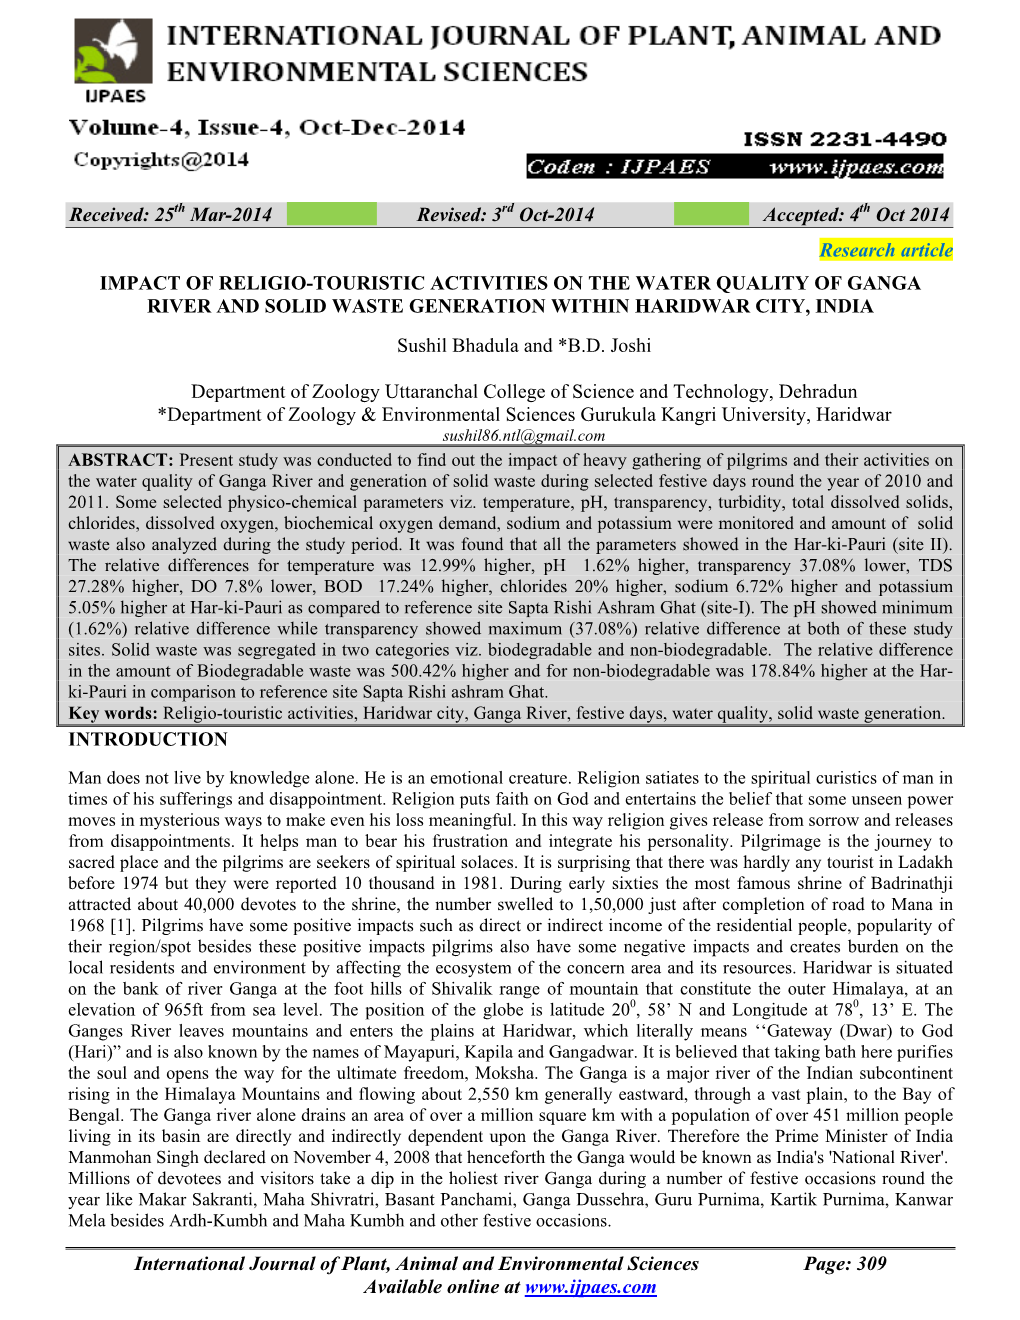 IMPACT of RELIGIO-TOURISTIC ACTIVITIES on the WATER QUALITY of GANGA RIVER and SOLID WASTE GENERATION WITHIN HARIDWAR CITY, INDIA Sushil Bhadula and *B.D